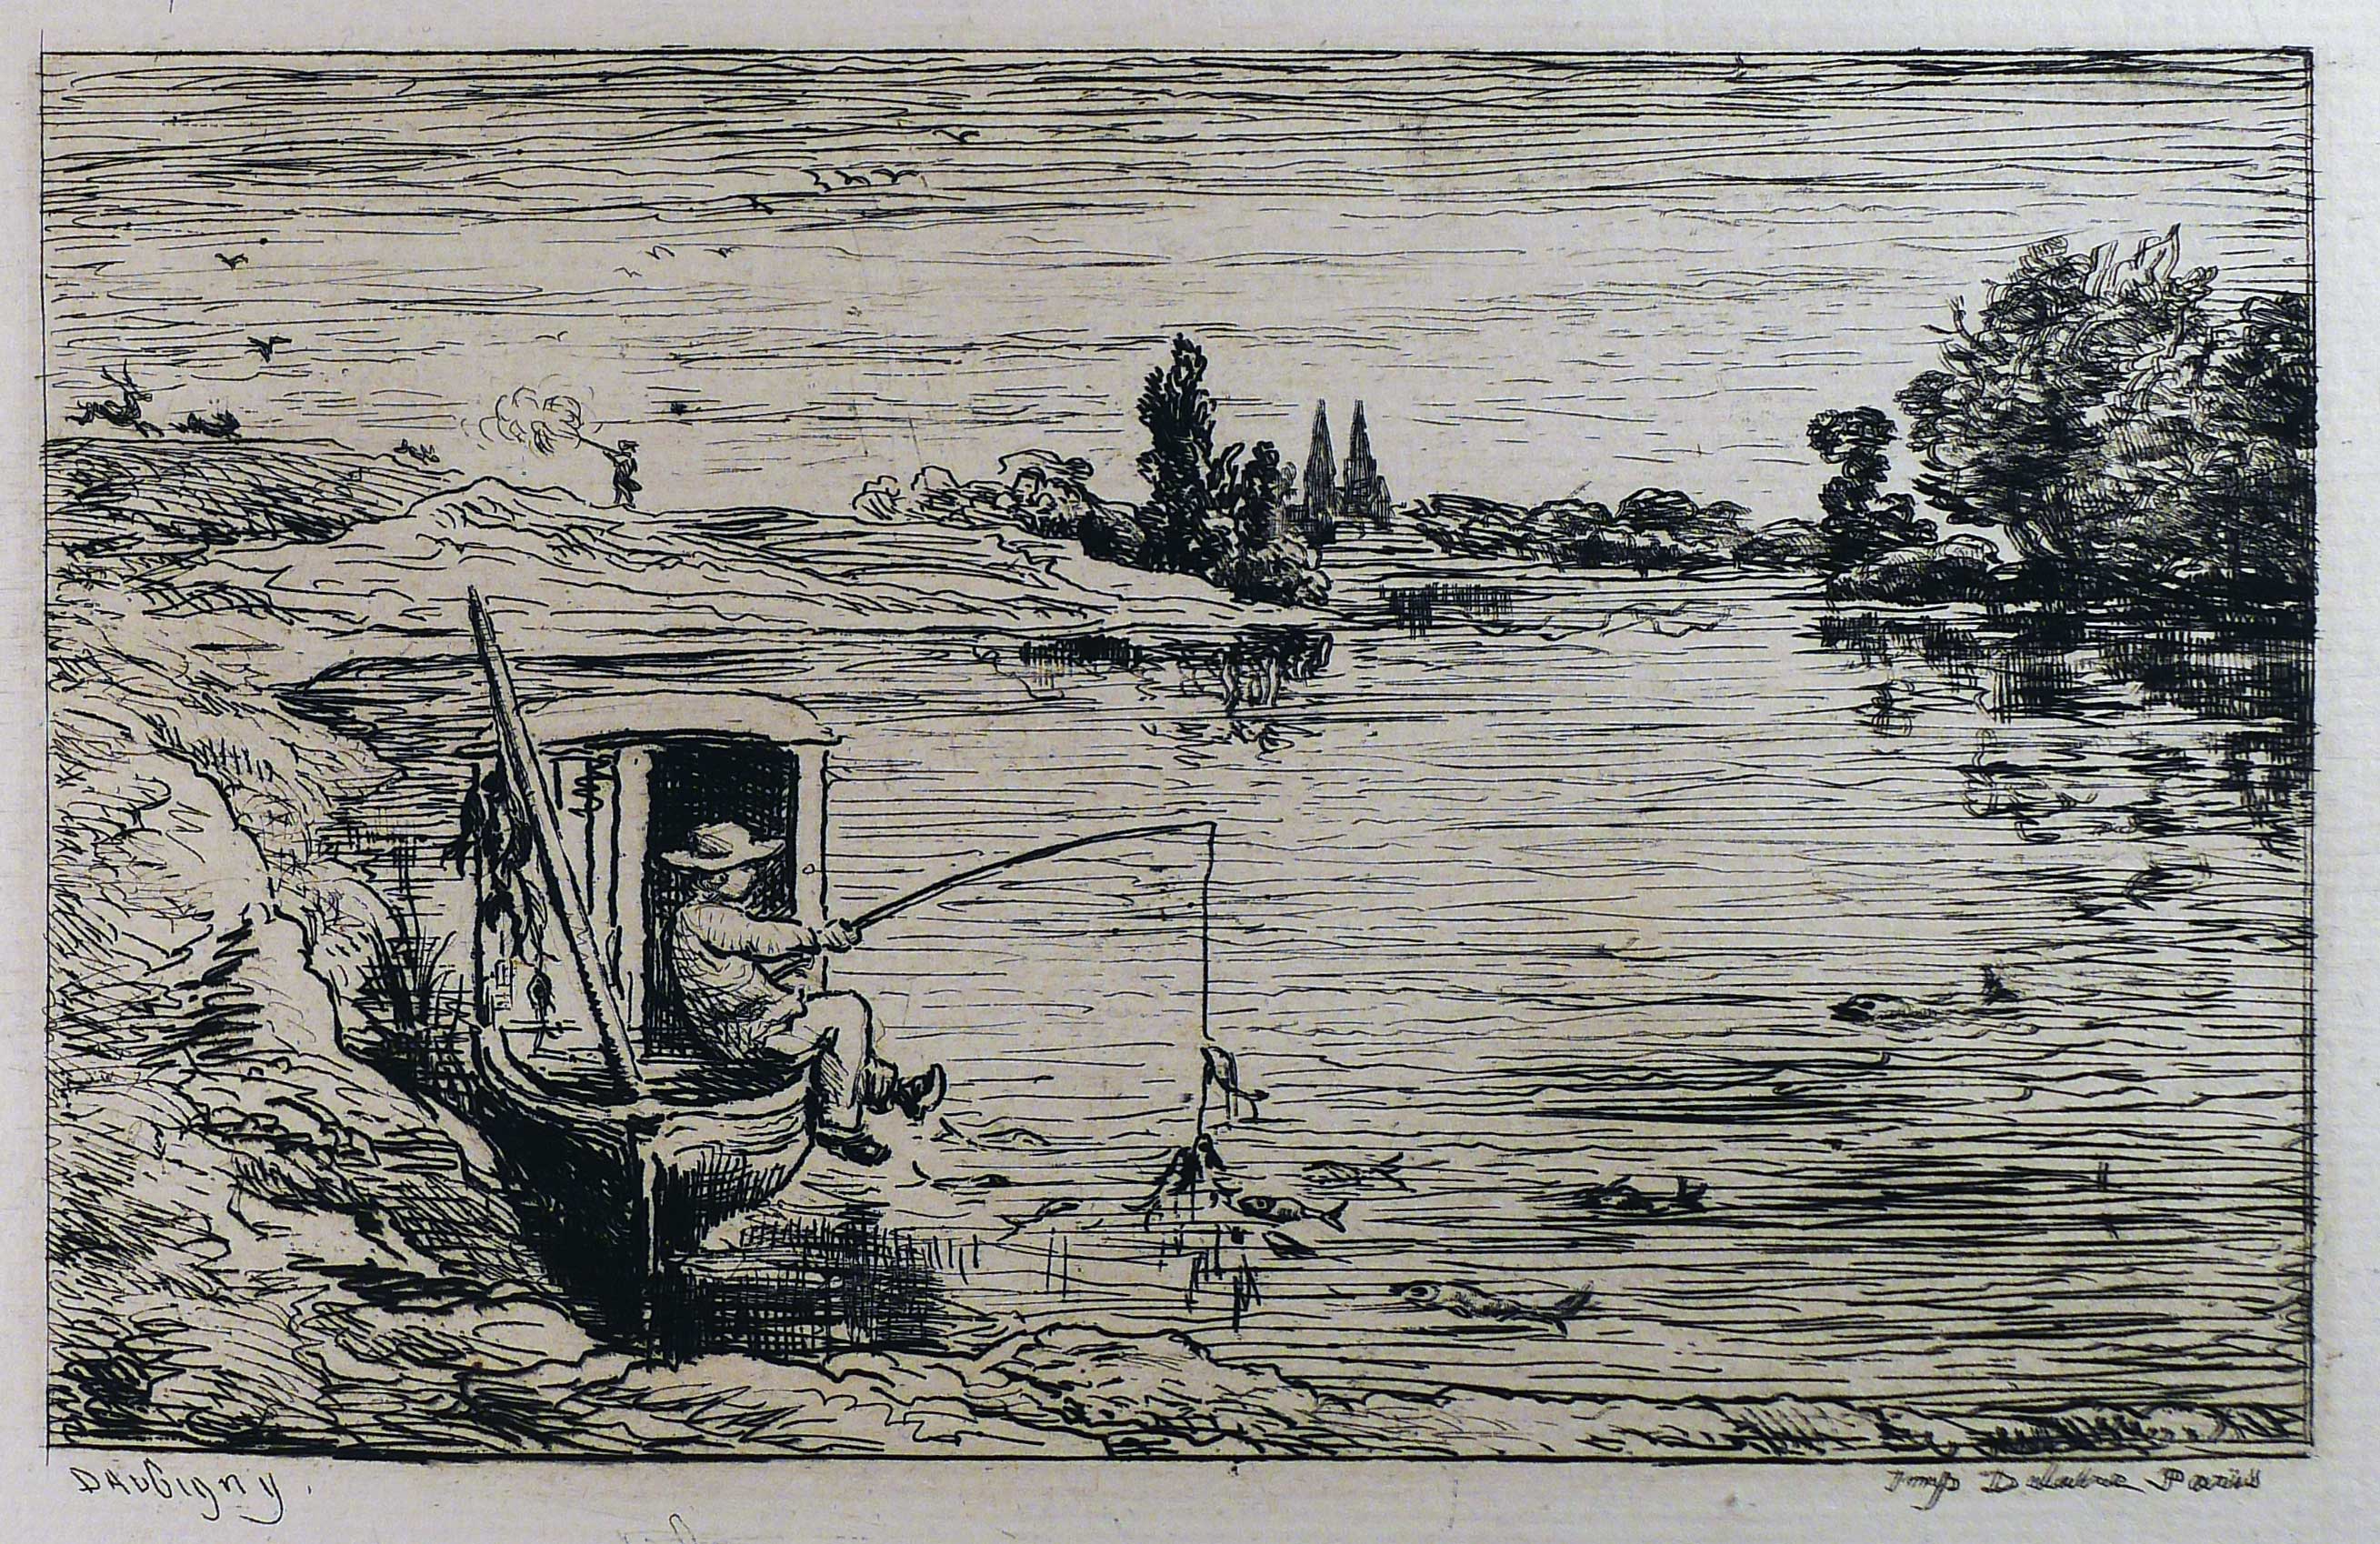 Charles François Daubigny, The Cabin Boy Fishing, 1861, published 1862 by Alfred Codart, Paris, etching. Collection of the Estate of Sallie Robinson Wadsworth.